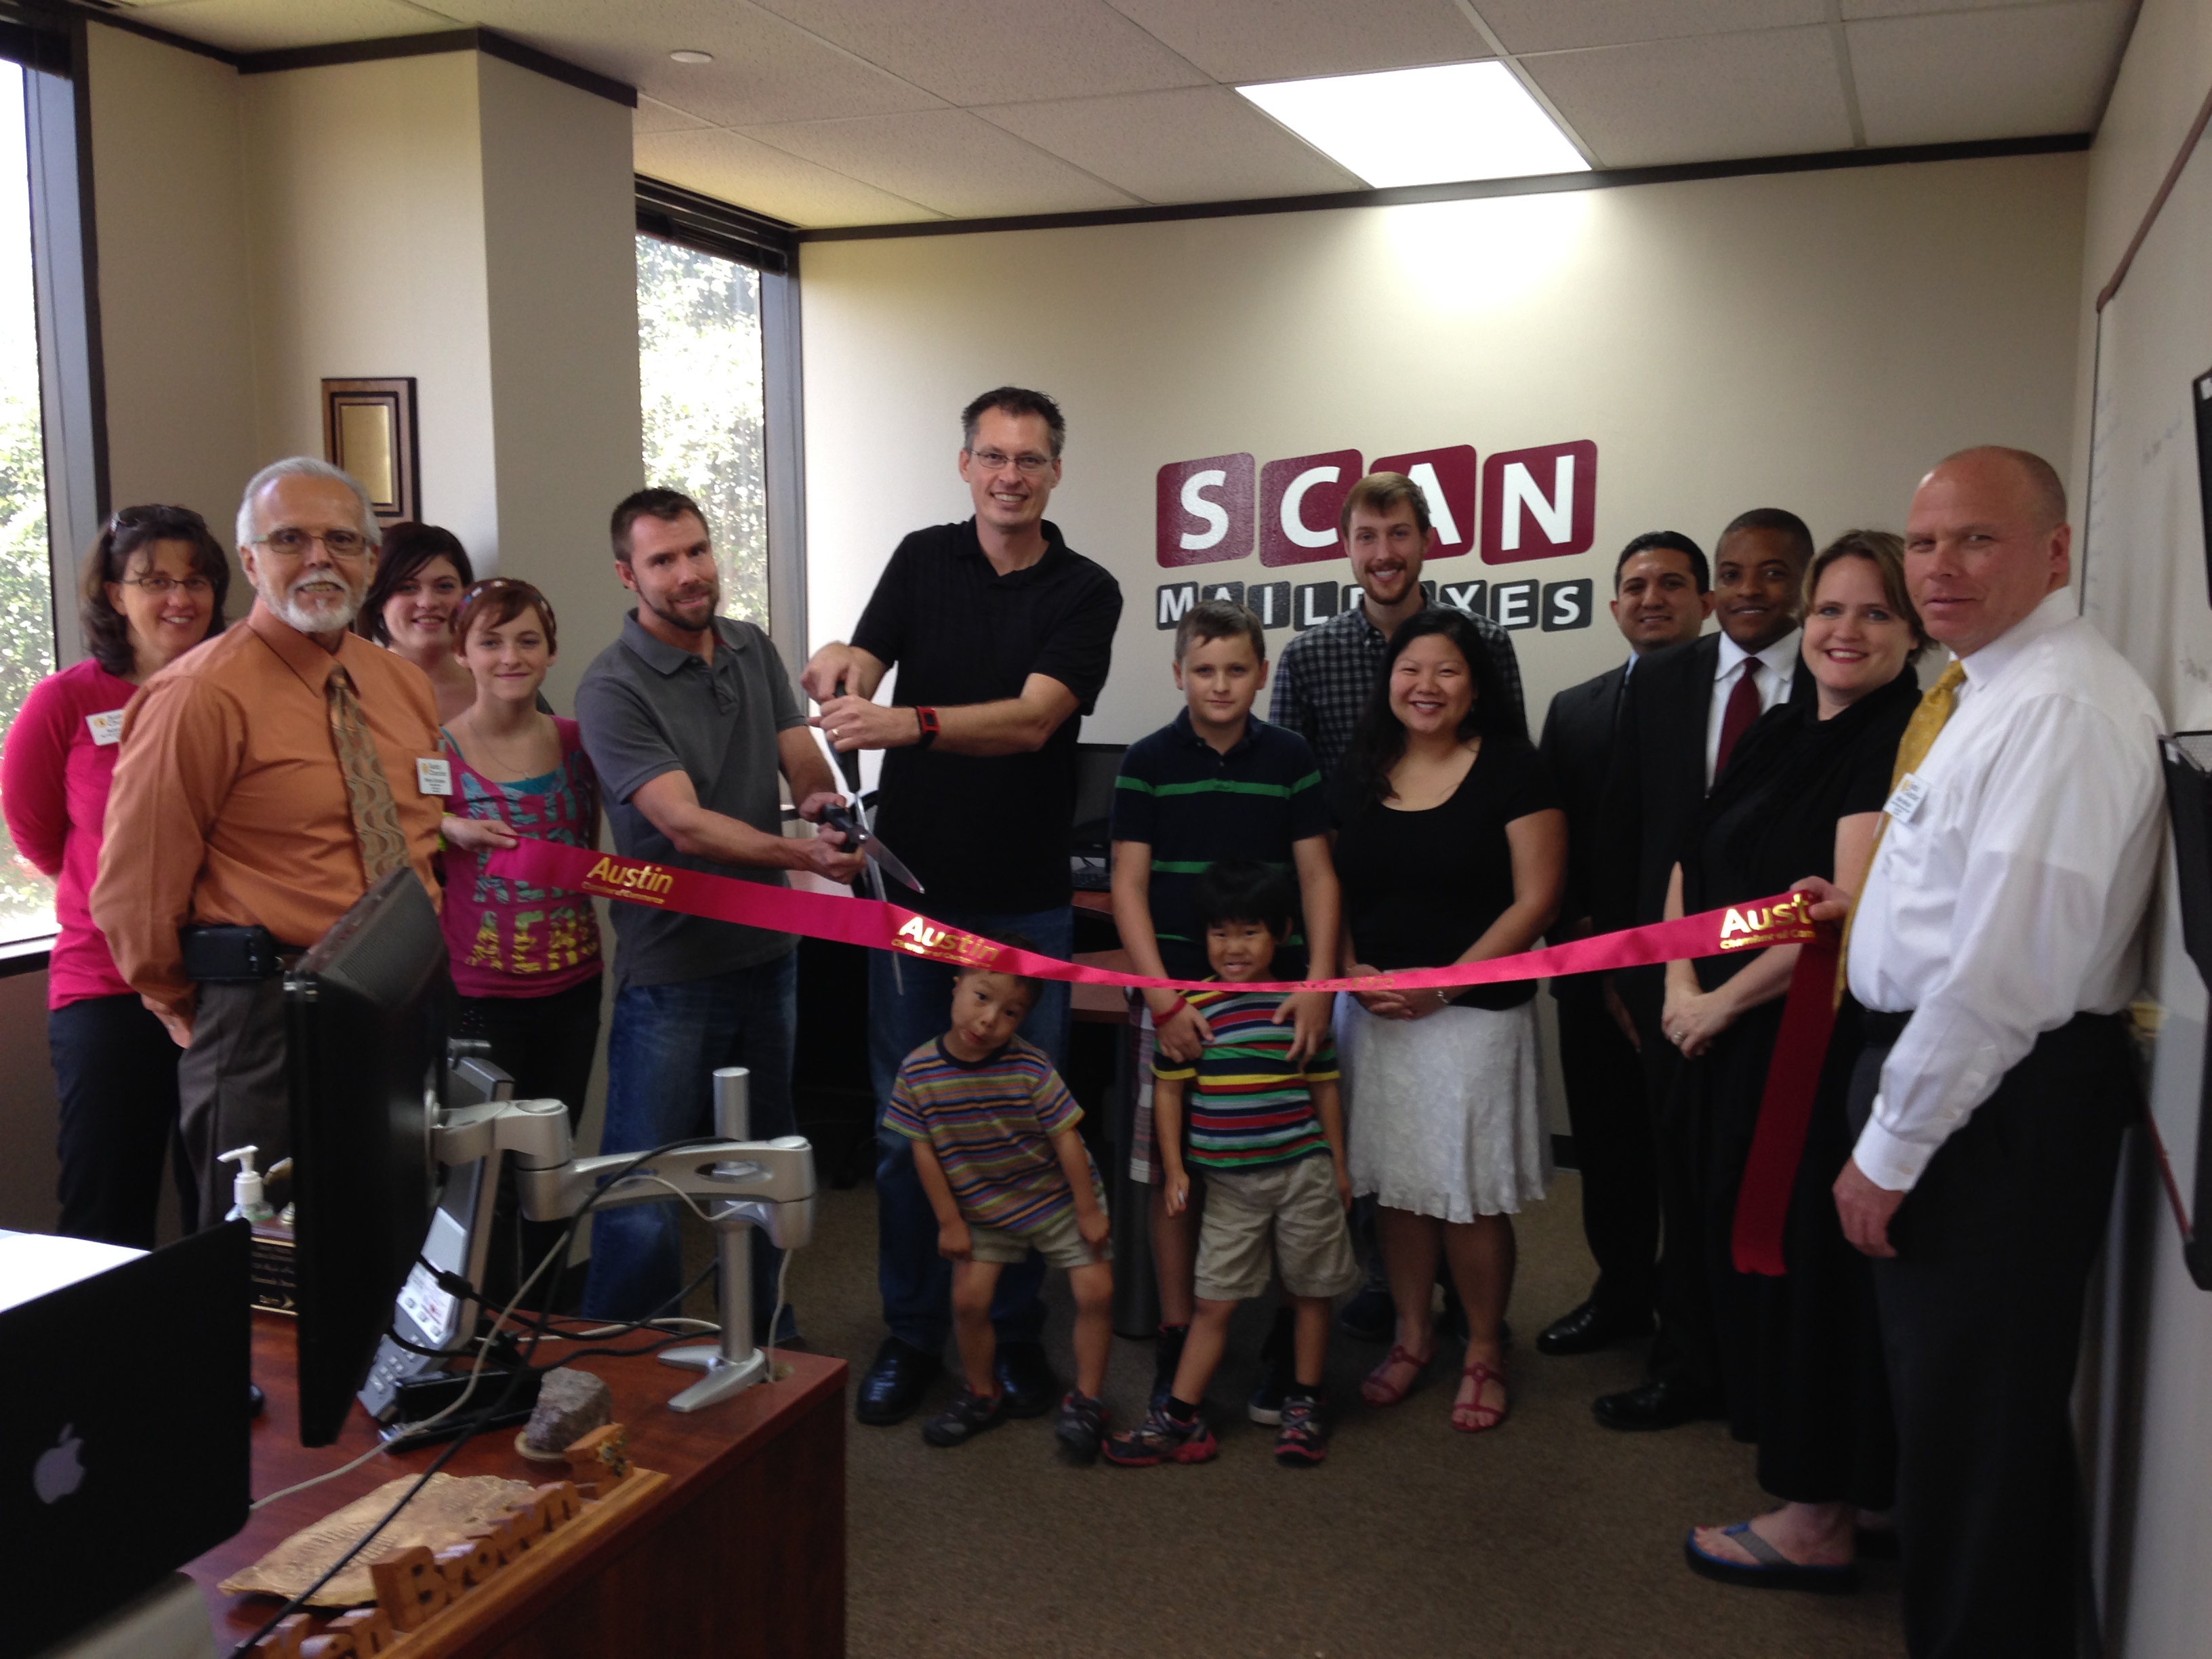 Ribbon cut with the Austin Chamber of Commerce